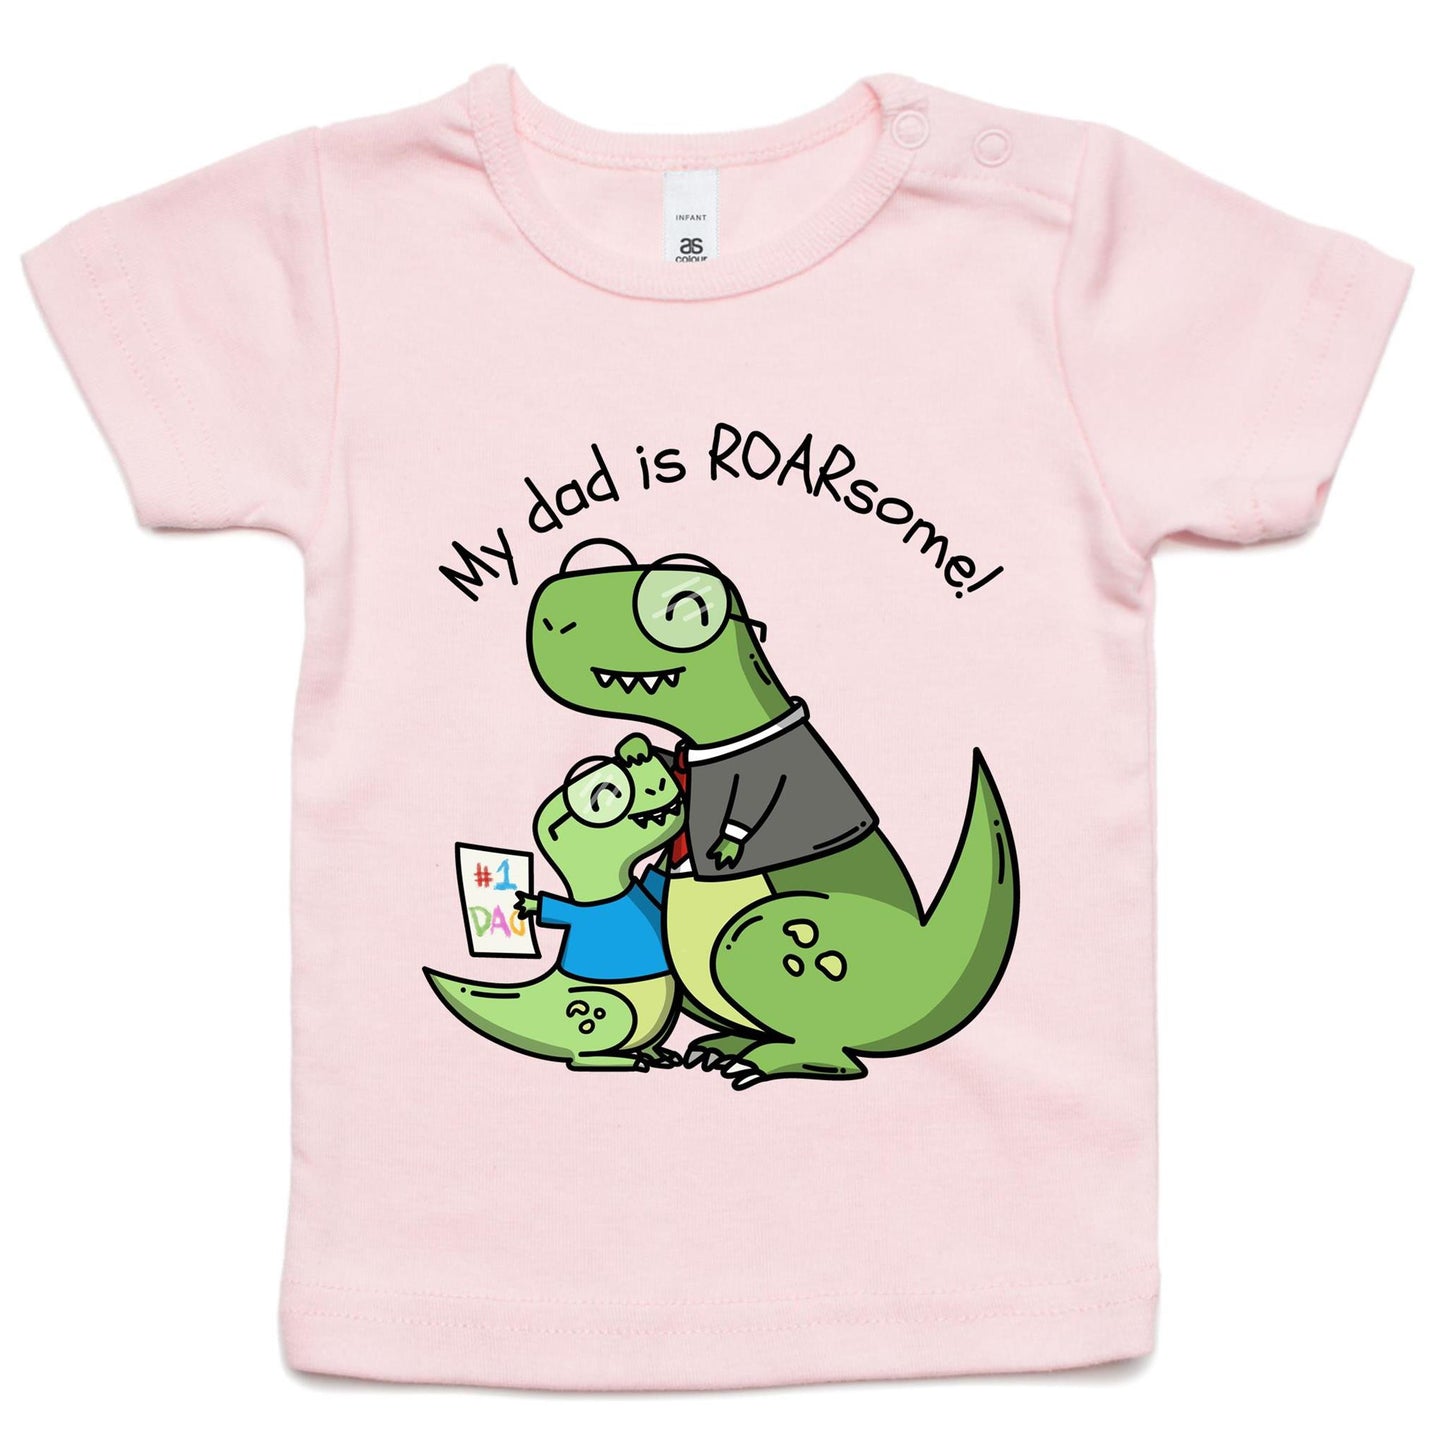 My Dad Is Roarsome - Baby T-shirt Pink Baby T-shirt animal Dad